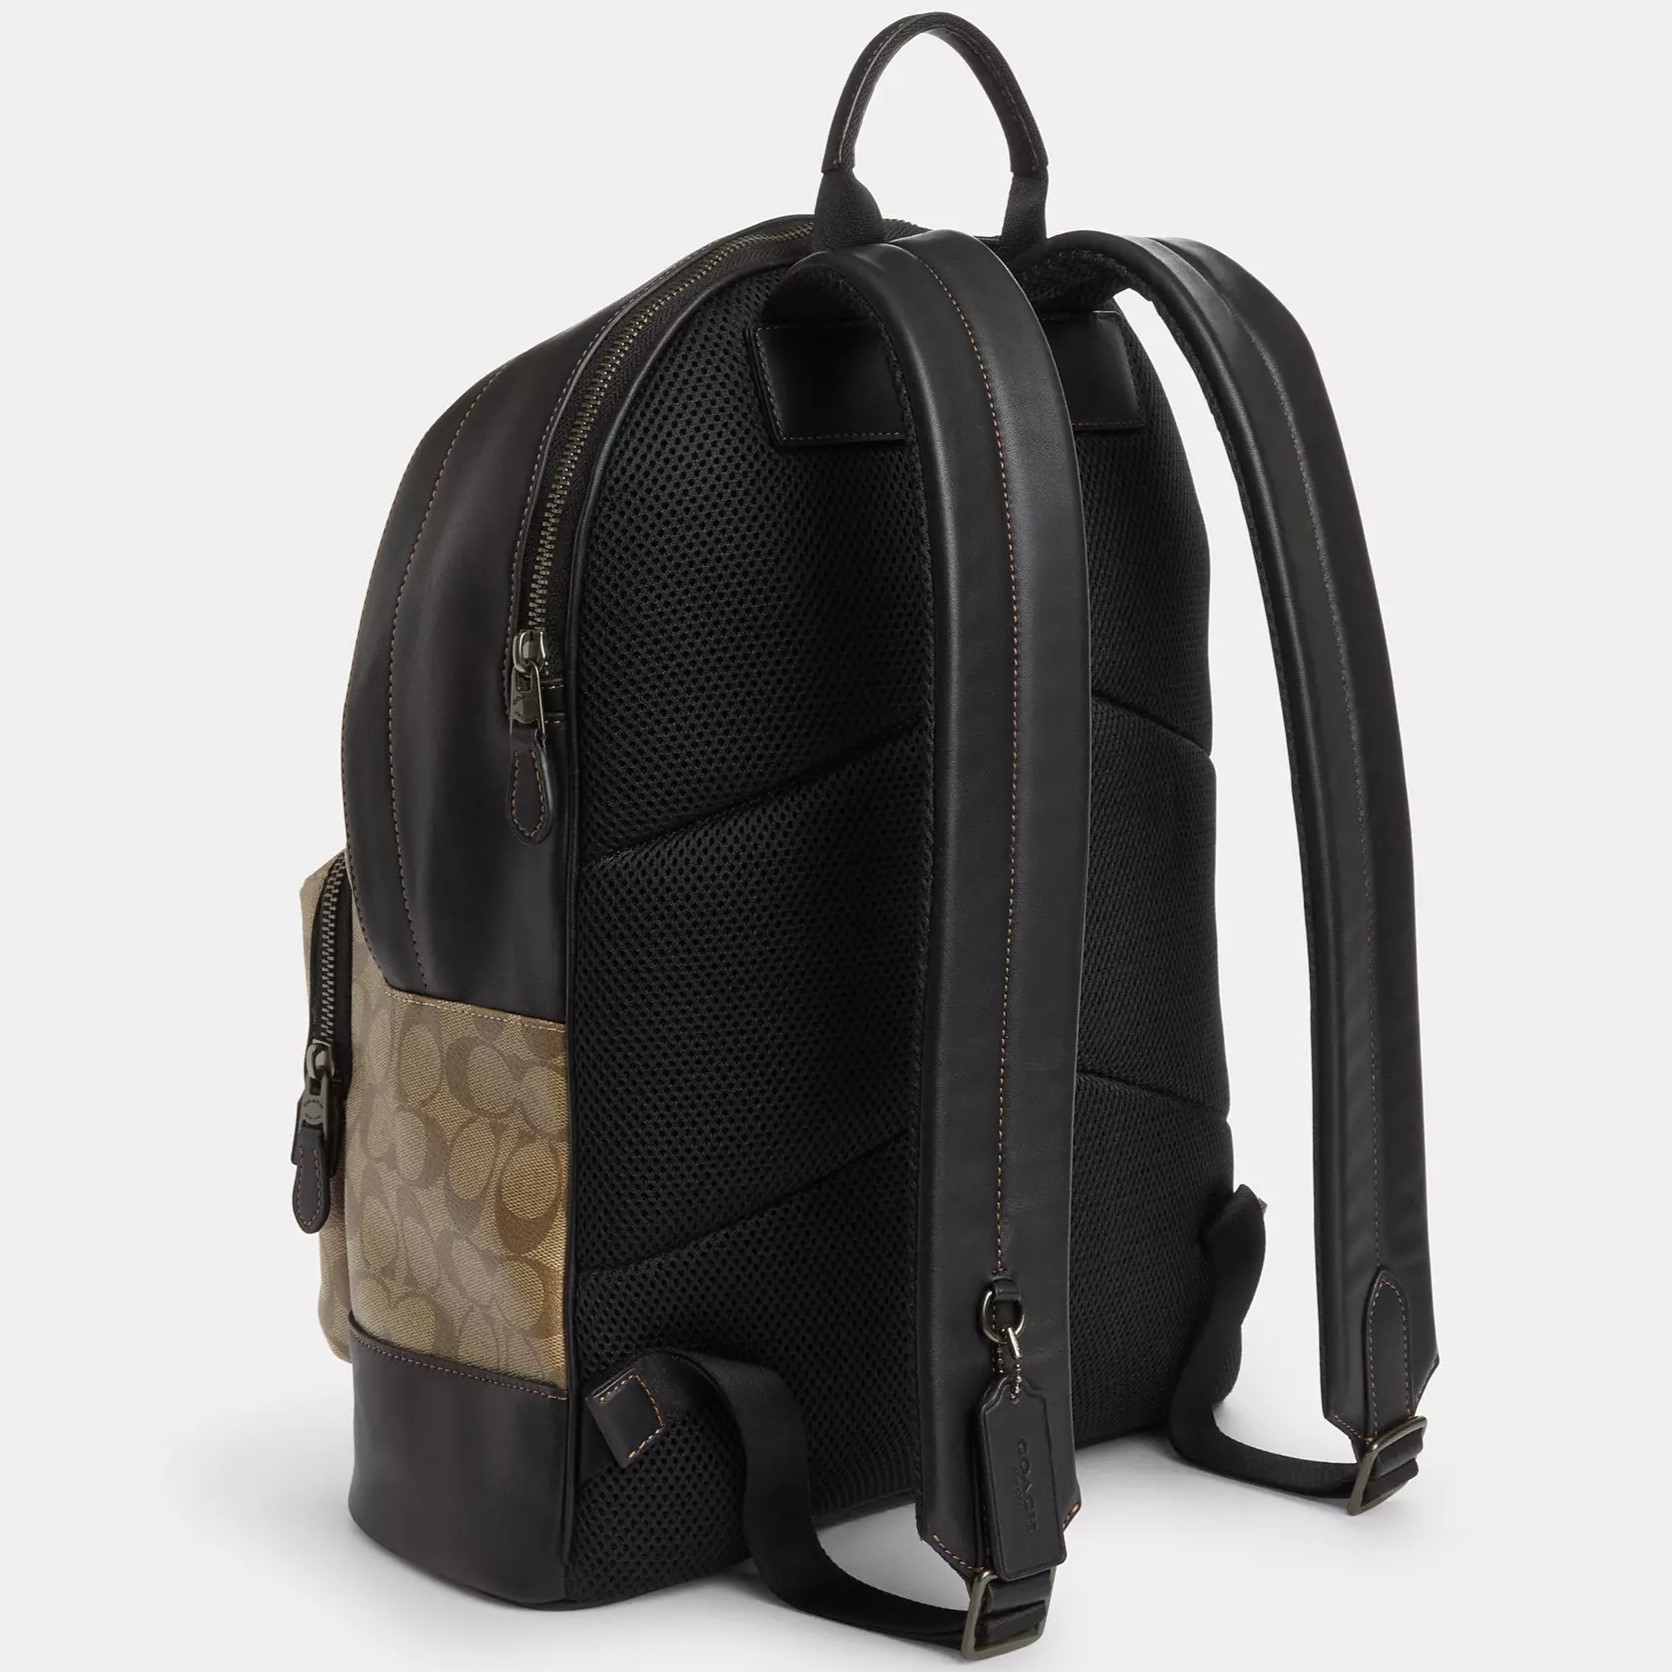 BALO MÀU NÂU SÁNG COACH WEST BACKPACK IN BLOCKED SIGNATURE CANVAS WITH VARSITY STRIPE CQ629 1